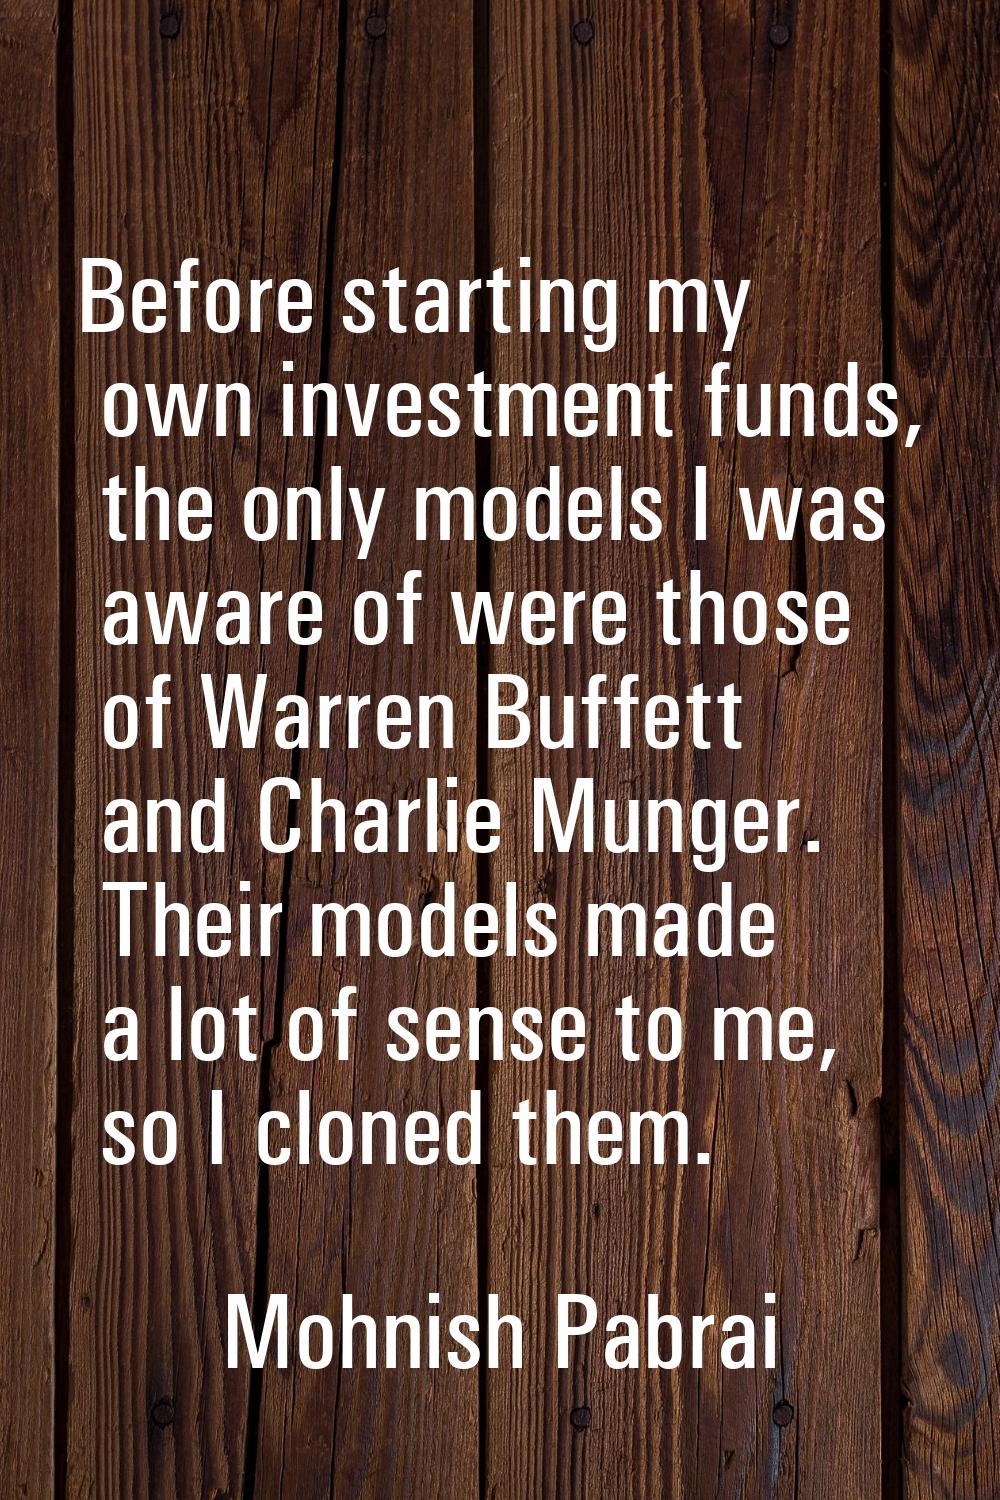 Before starting my own investment funds, the only models I was aware of were those of Warren Buffet